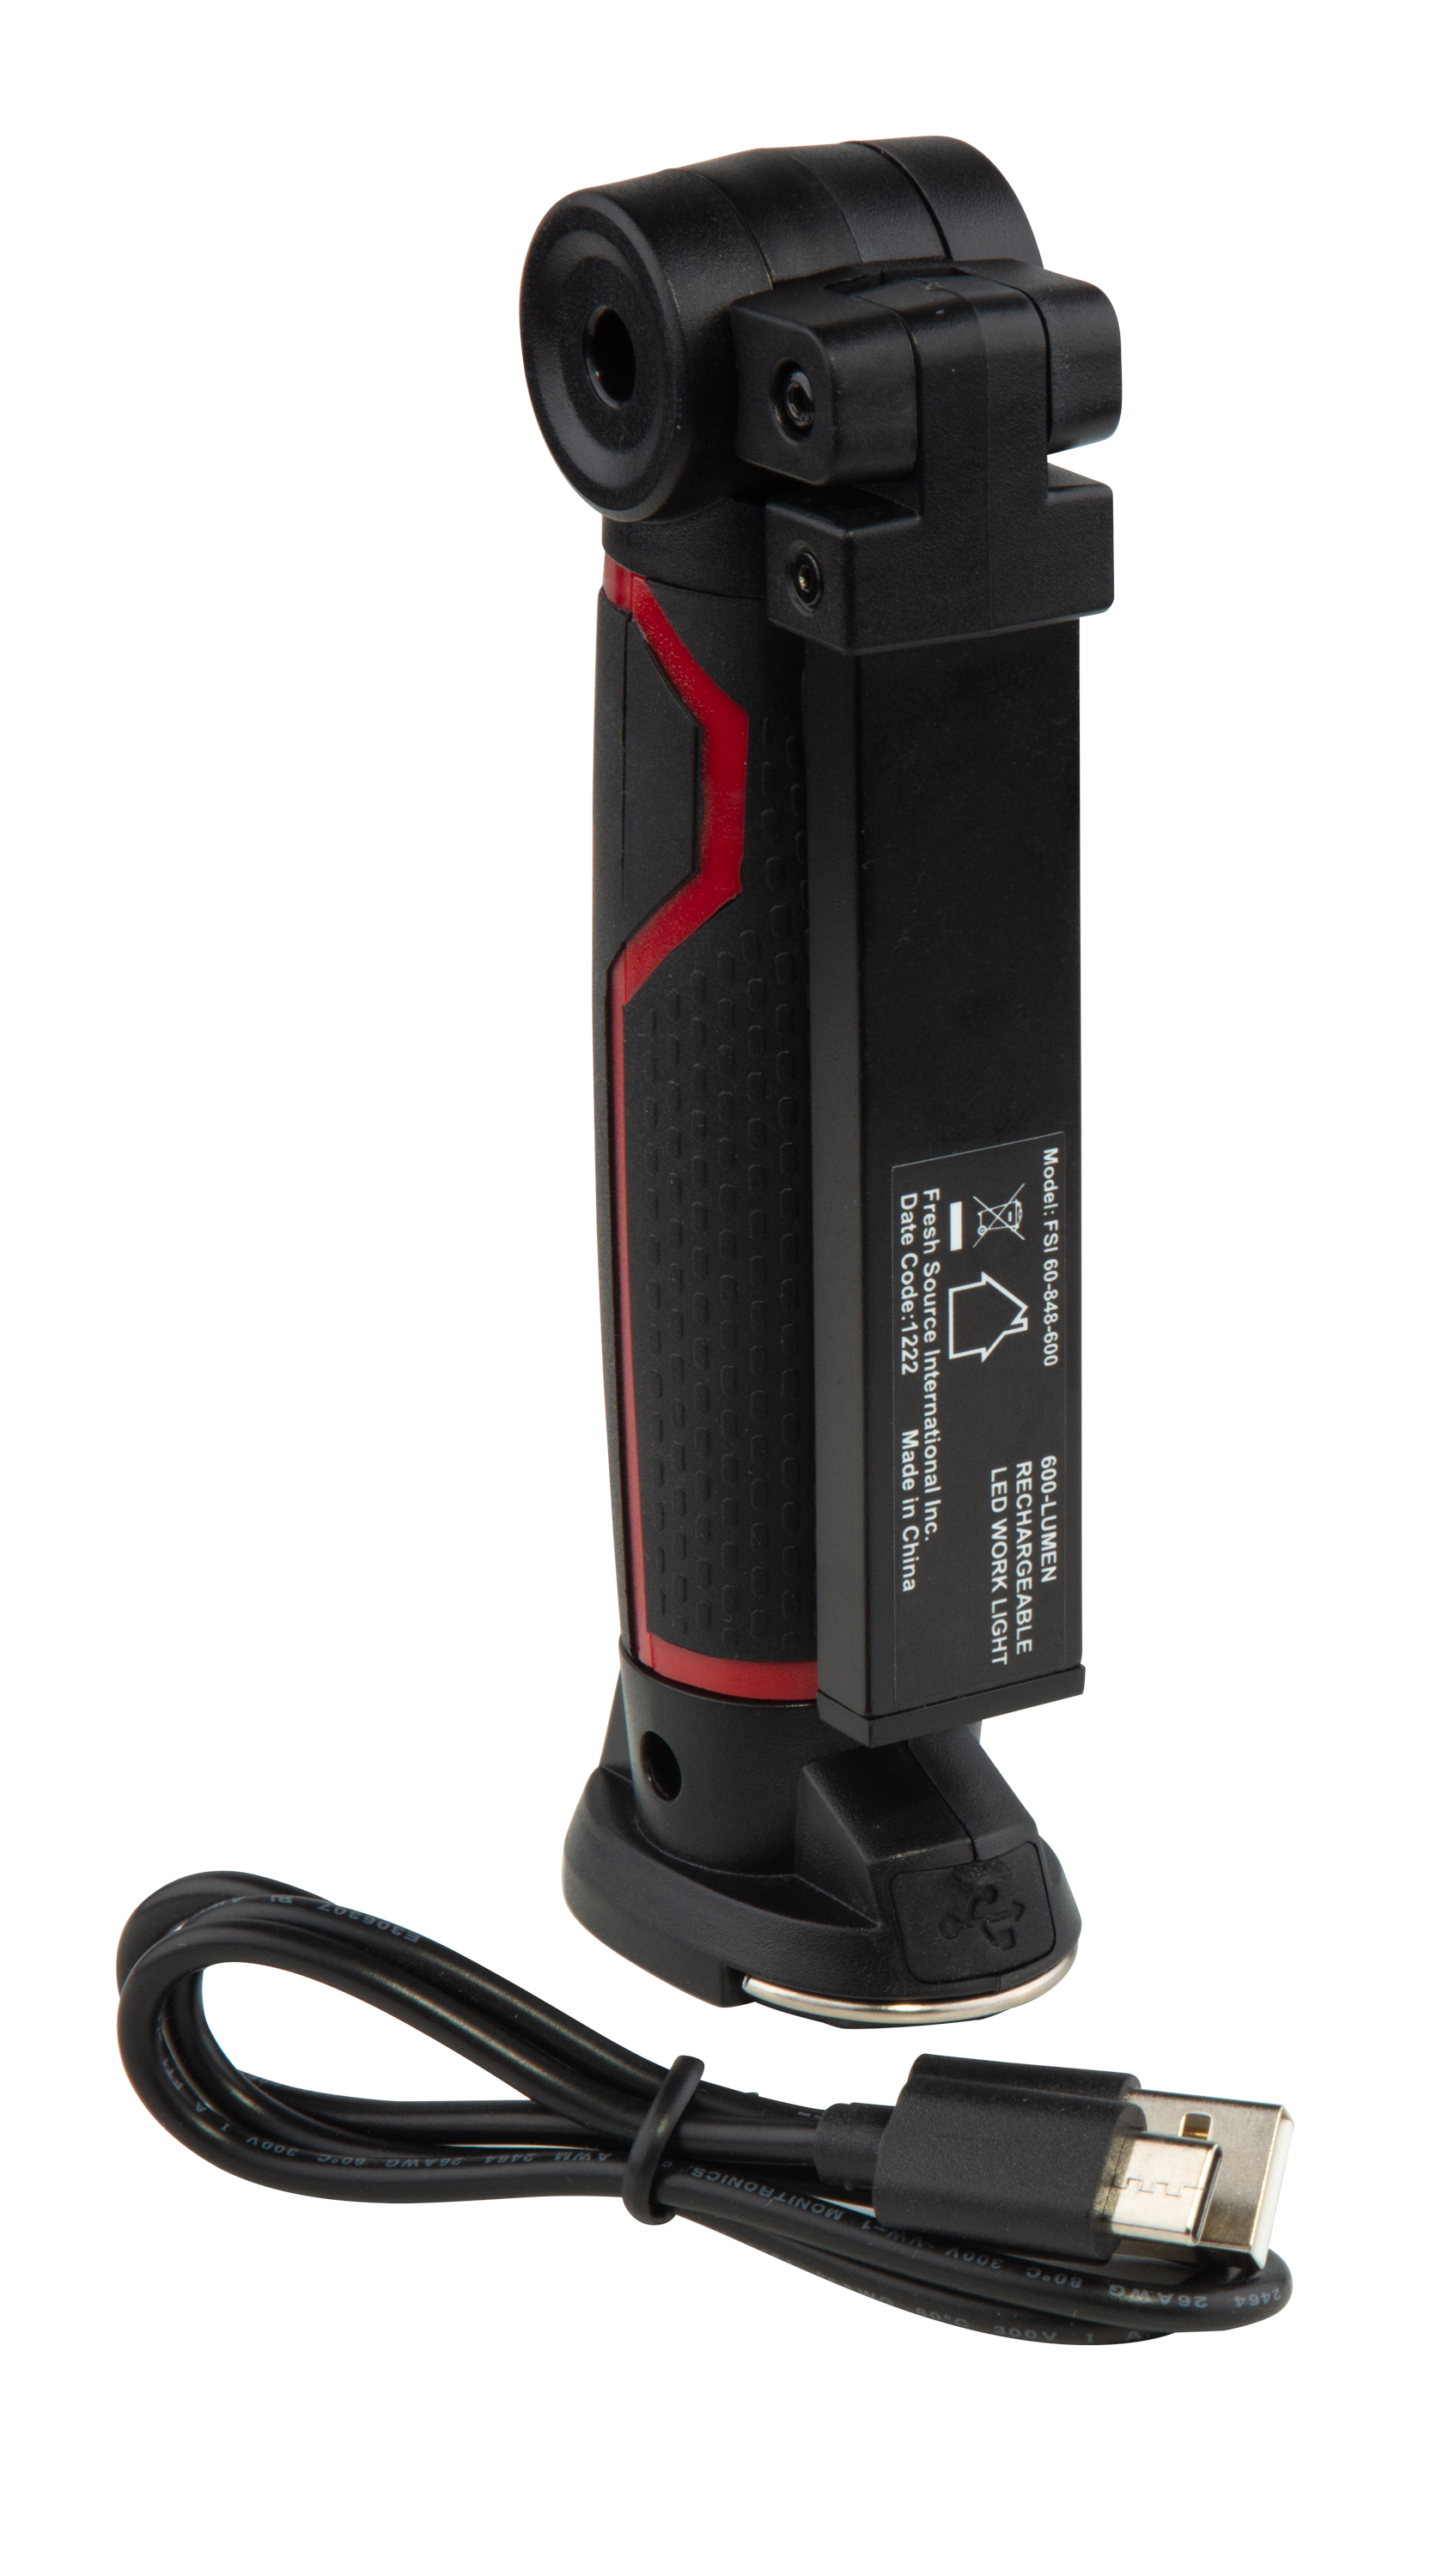 Hyper Tough LED Rechargeable Work Light with Magnetic Base, 600 Lumens 